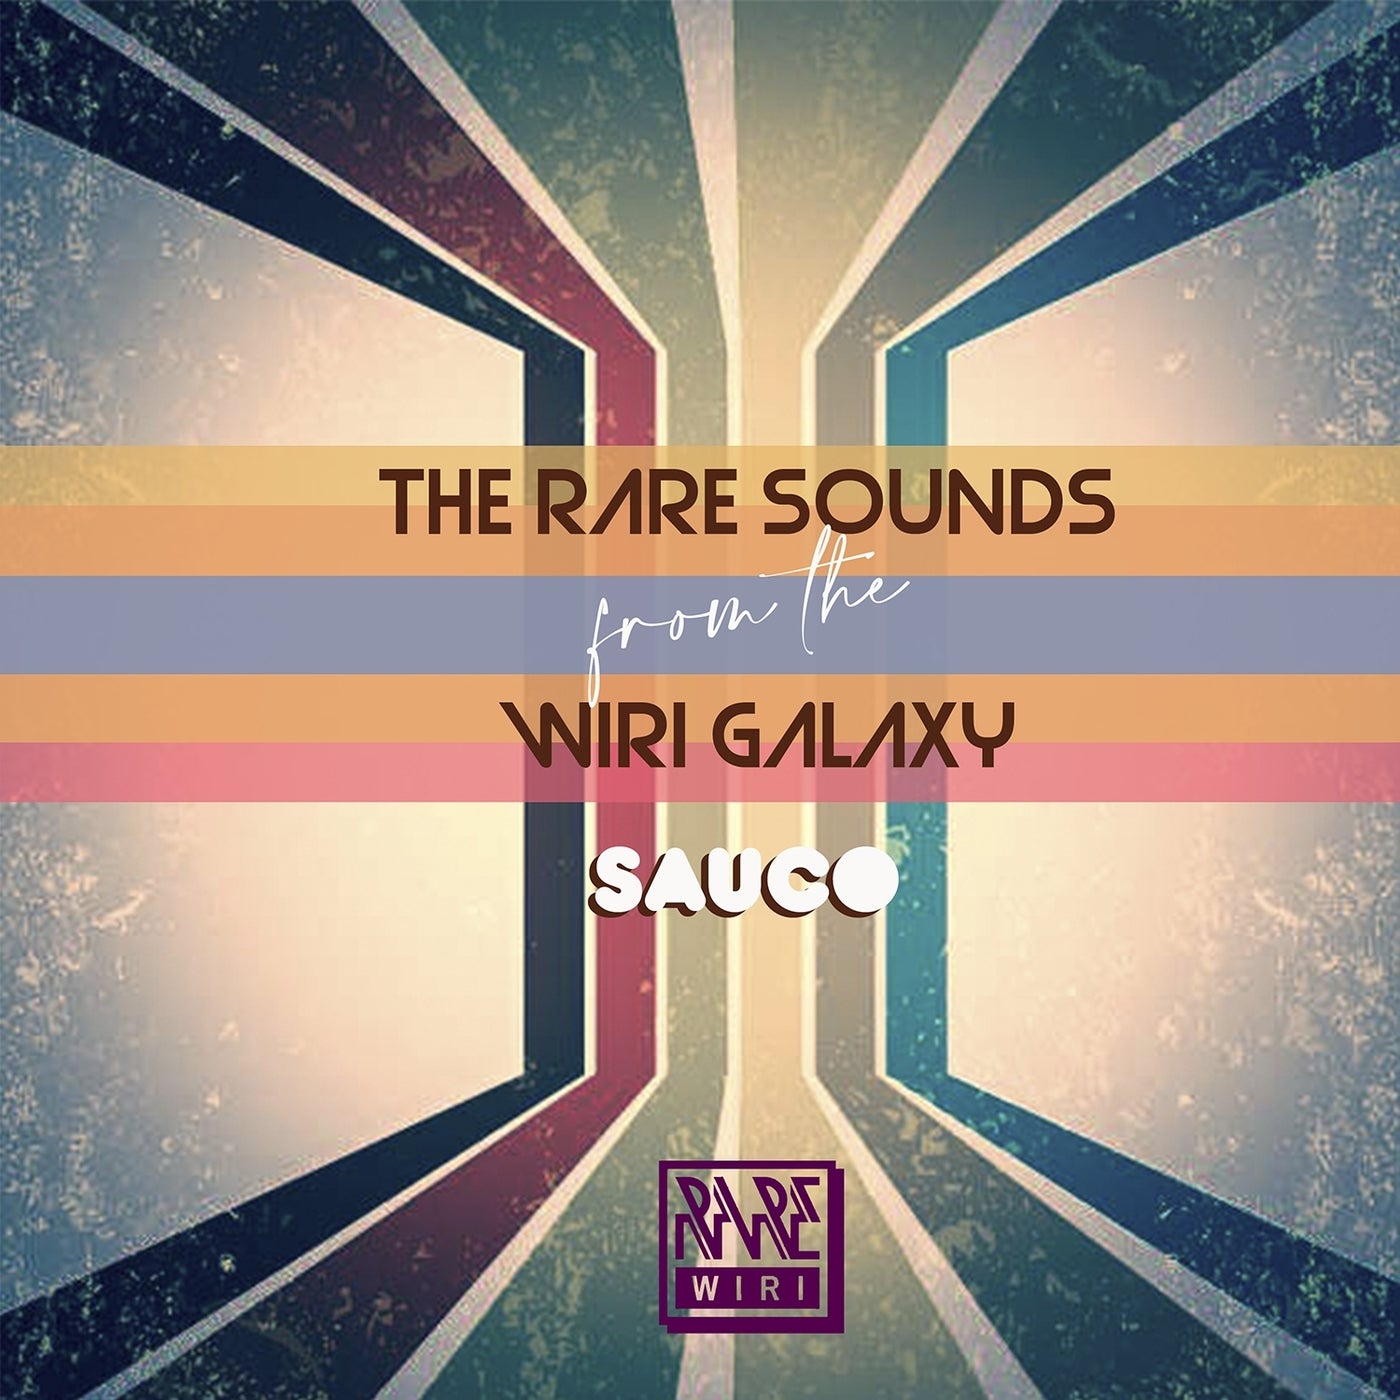 The Rare Sounds of the Wiri Galaxy